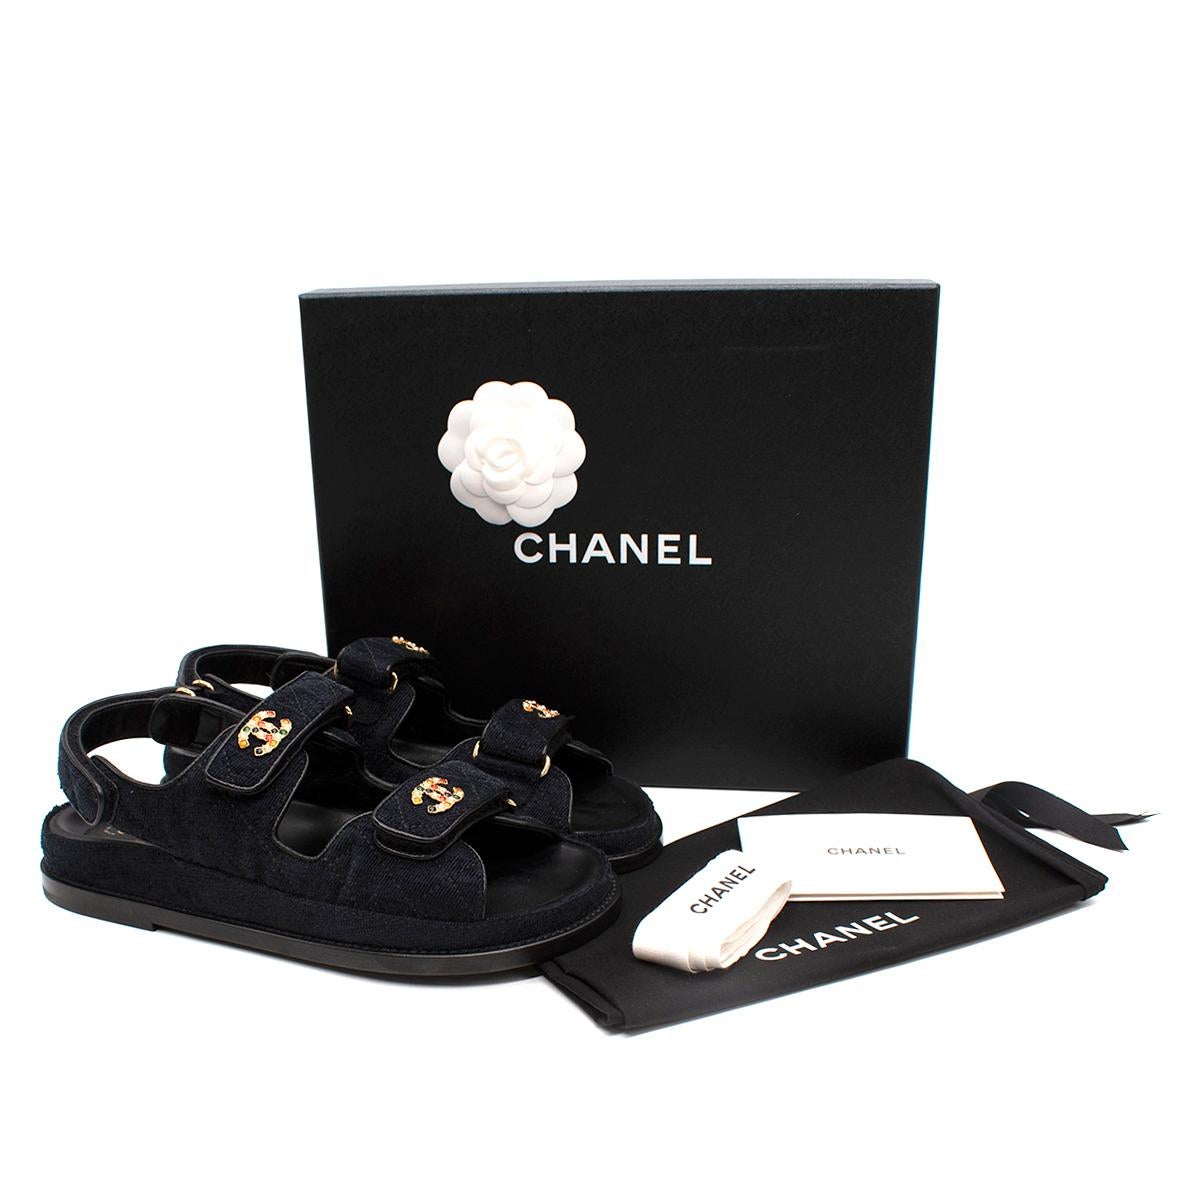 Chanel Navy Quilted Denim Dad Sandals 

- Navy quilted denim fabric
- Multi coloured Chanel logo on the side of the fasteners
- Gold tone hardware
- Velcro fastening

Material: 
Denim

Made in Italy 

PLEASE NOTE, THESE ITEMS ARE PRE-OWNED AND MAY